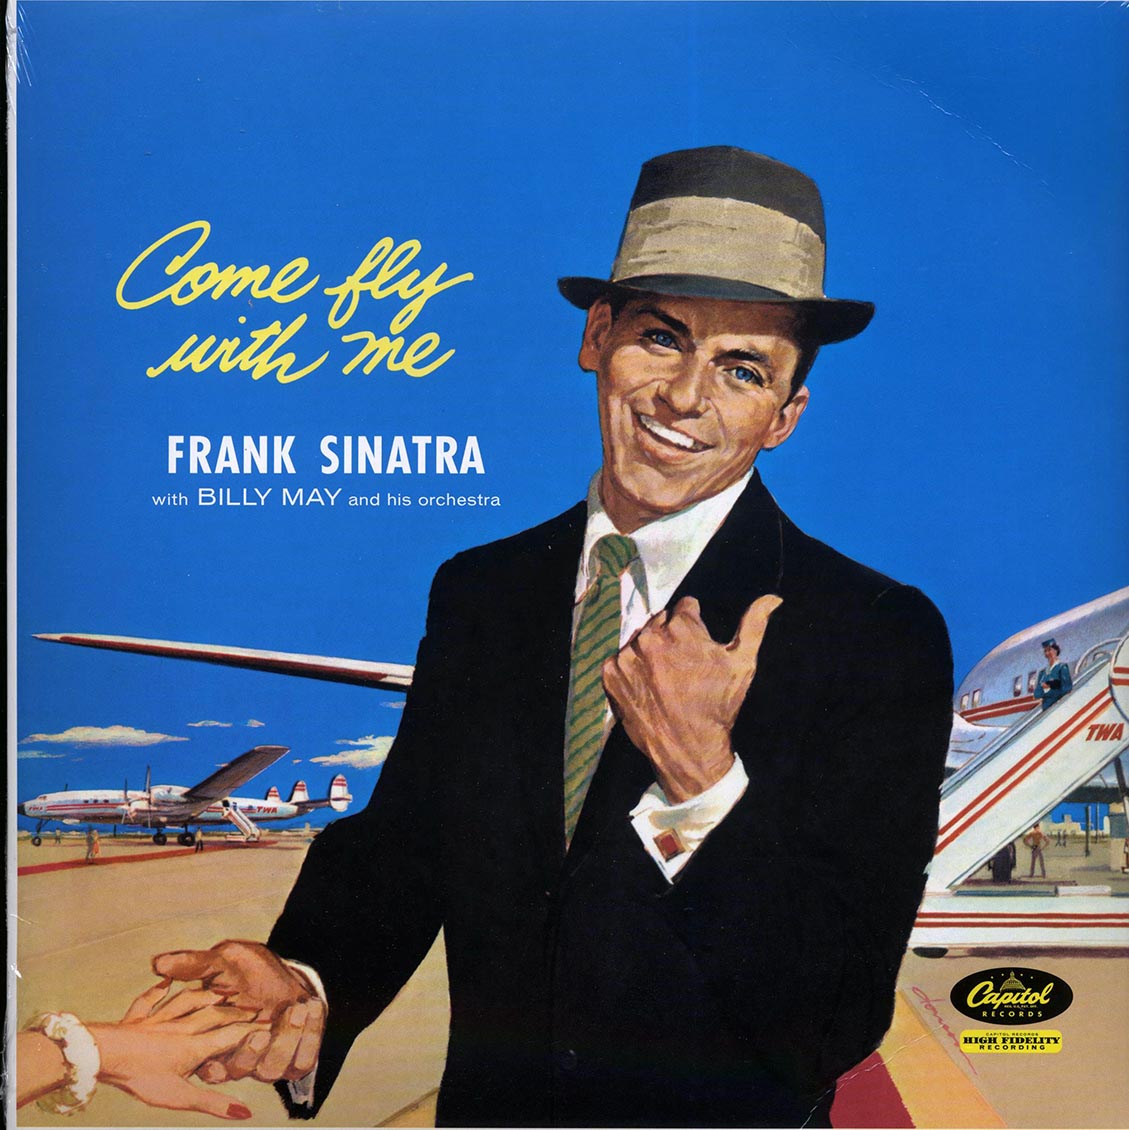 Frank Sinatra - Come Fly With Me (mono) (180g) (remastered) - Vinyl LP